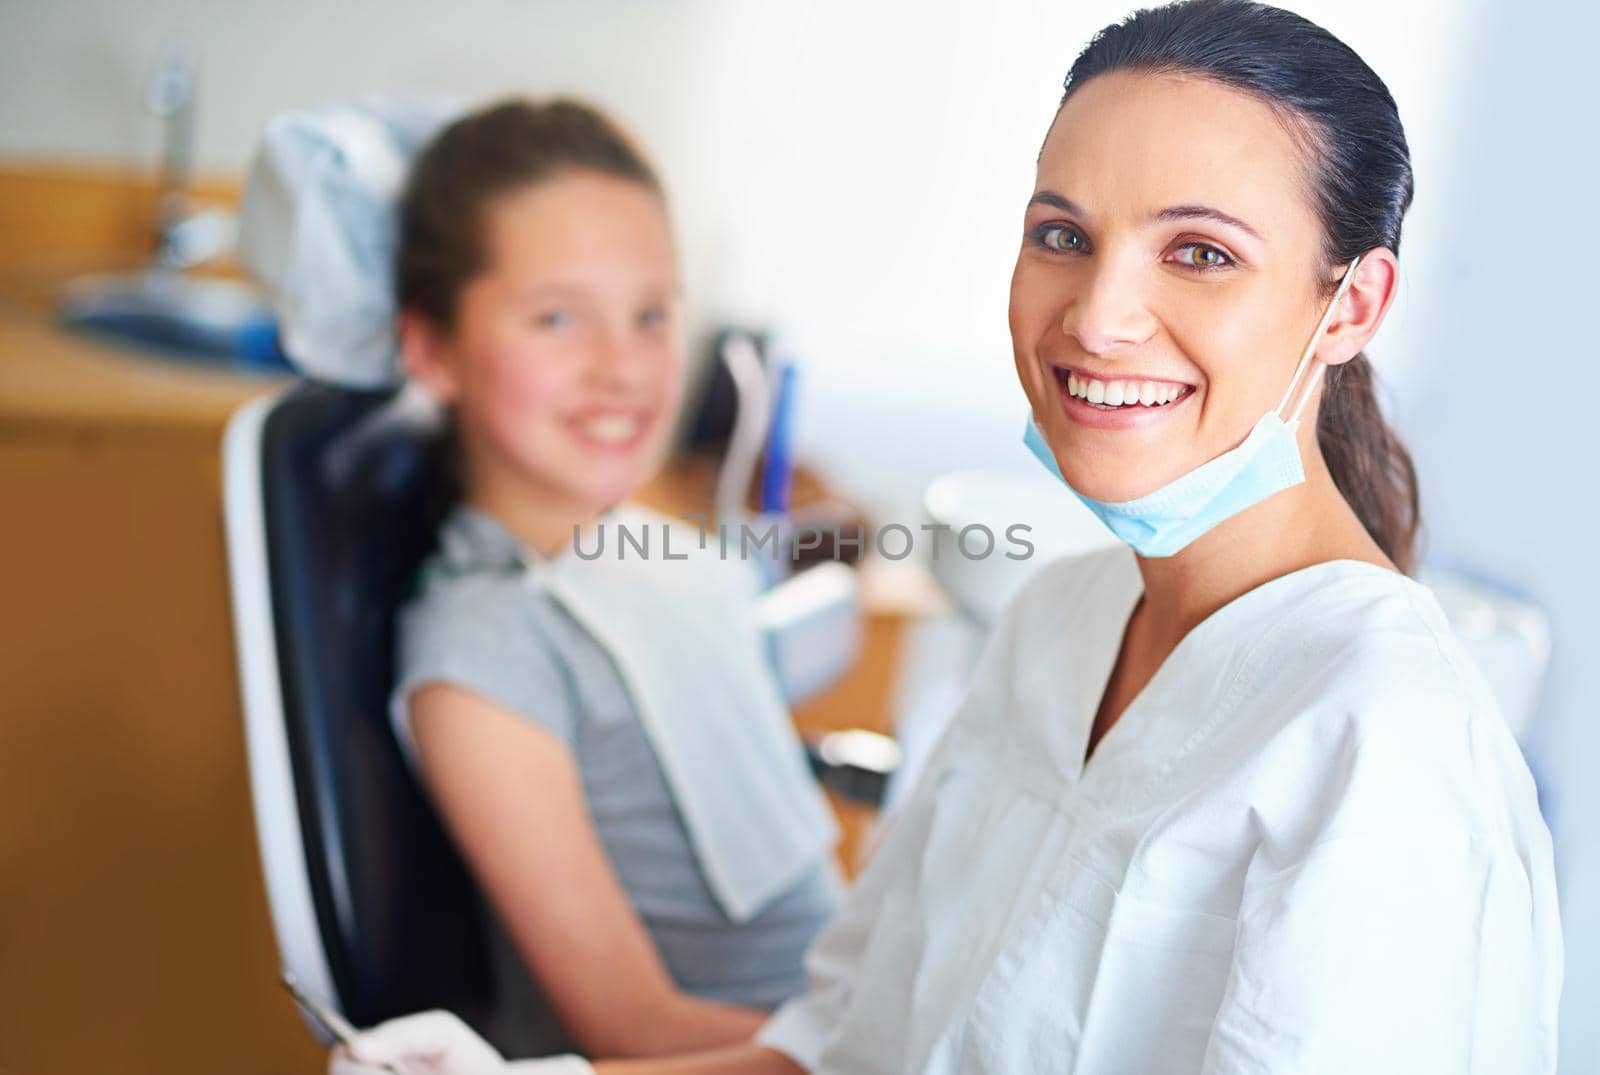 Portrait of a female dentist and child in a dentist office.